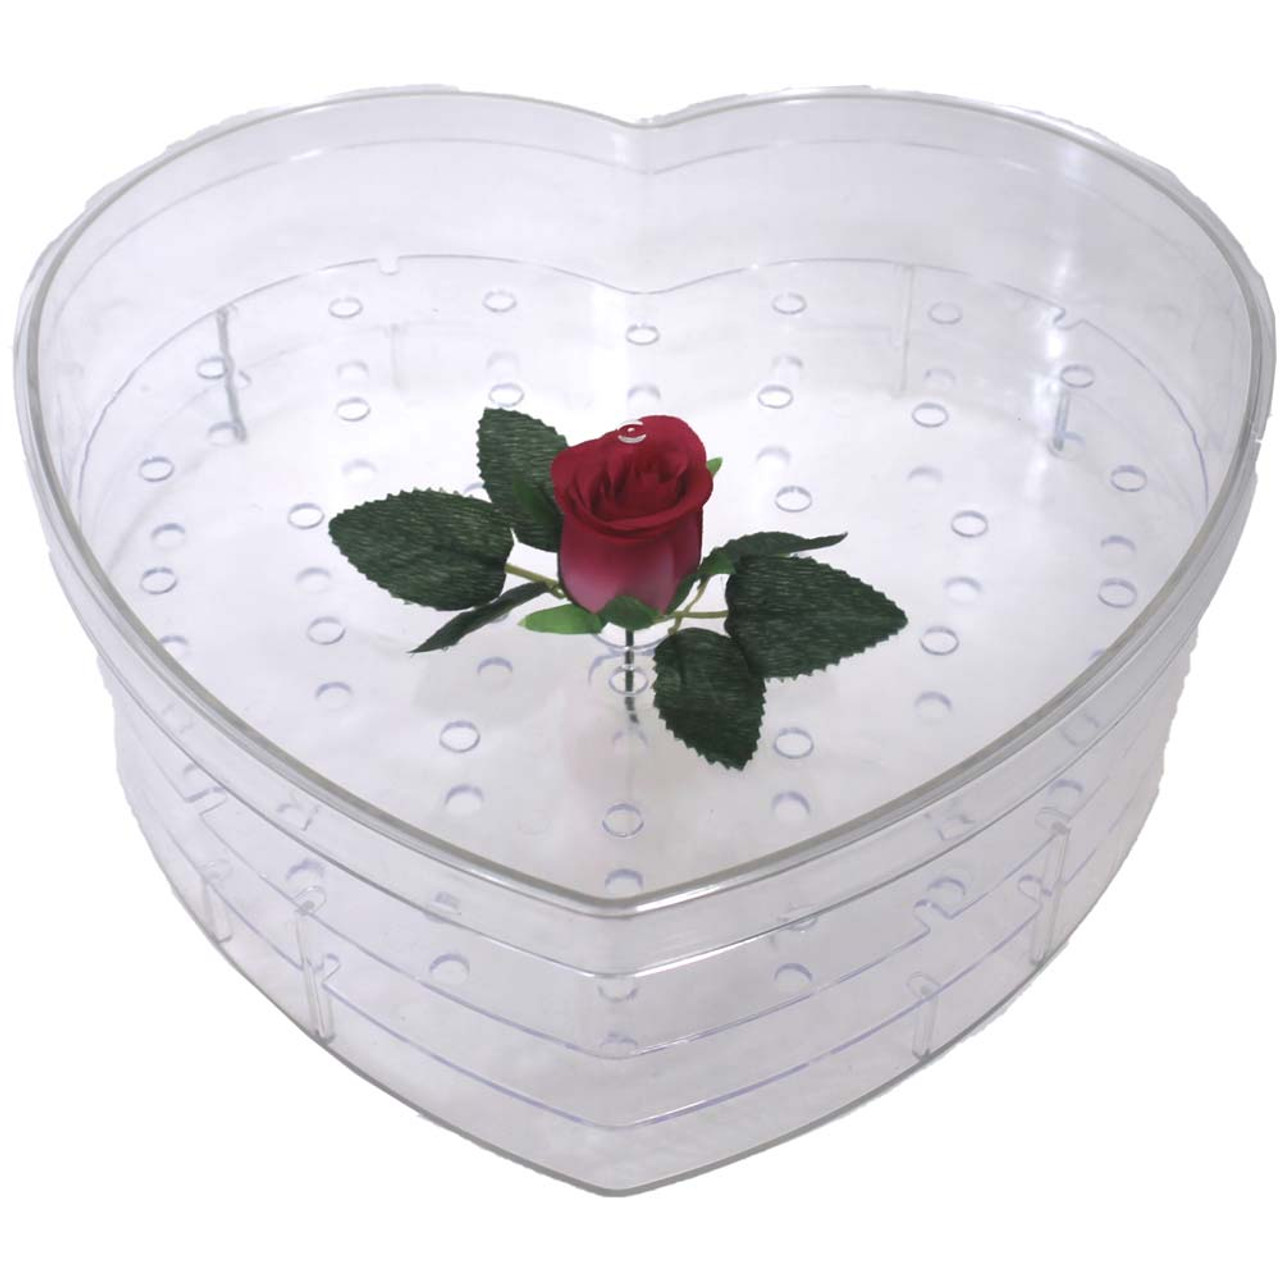 Acrylic Heart Domes Package